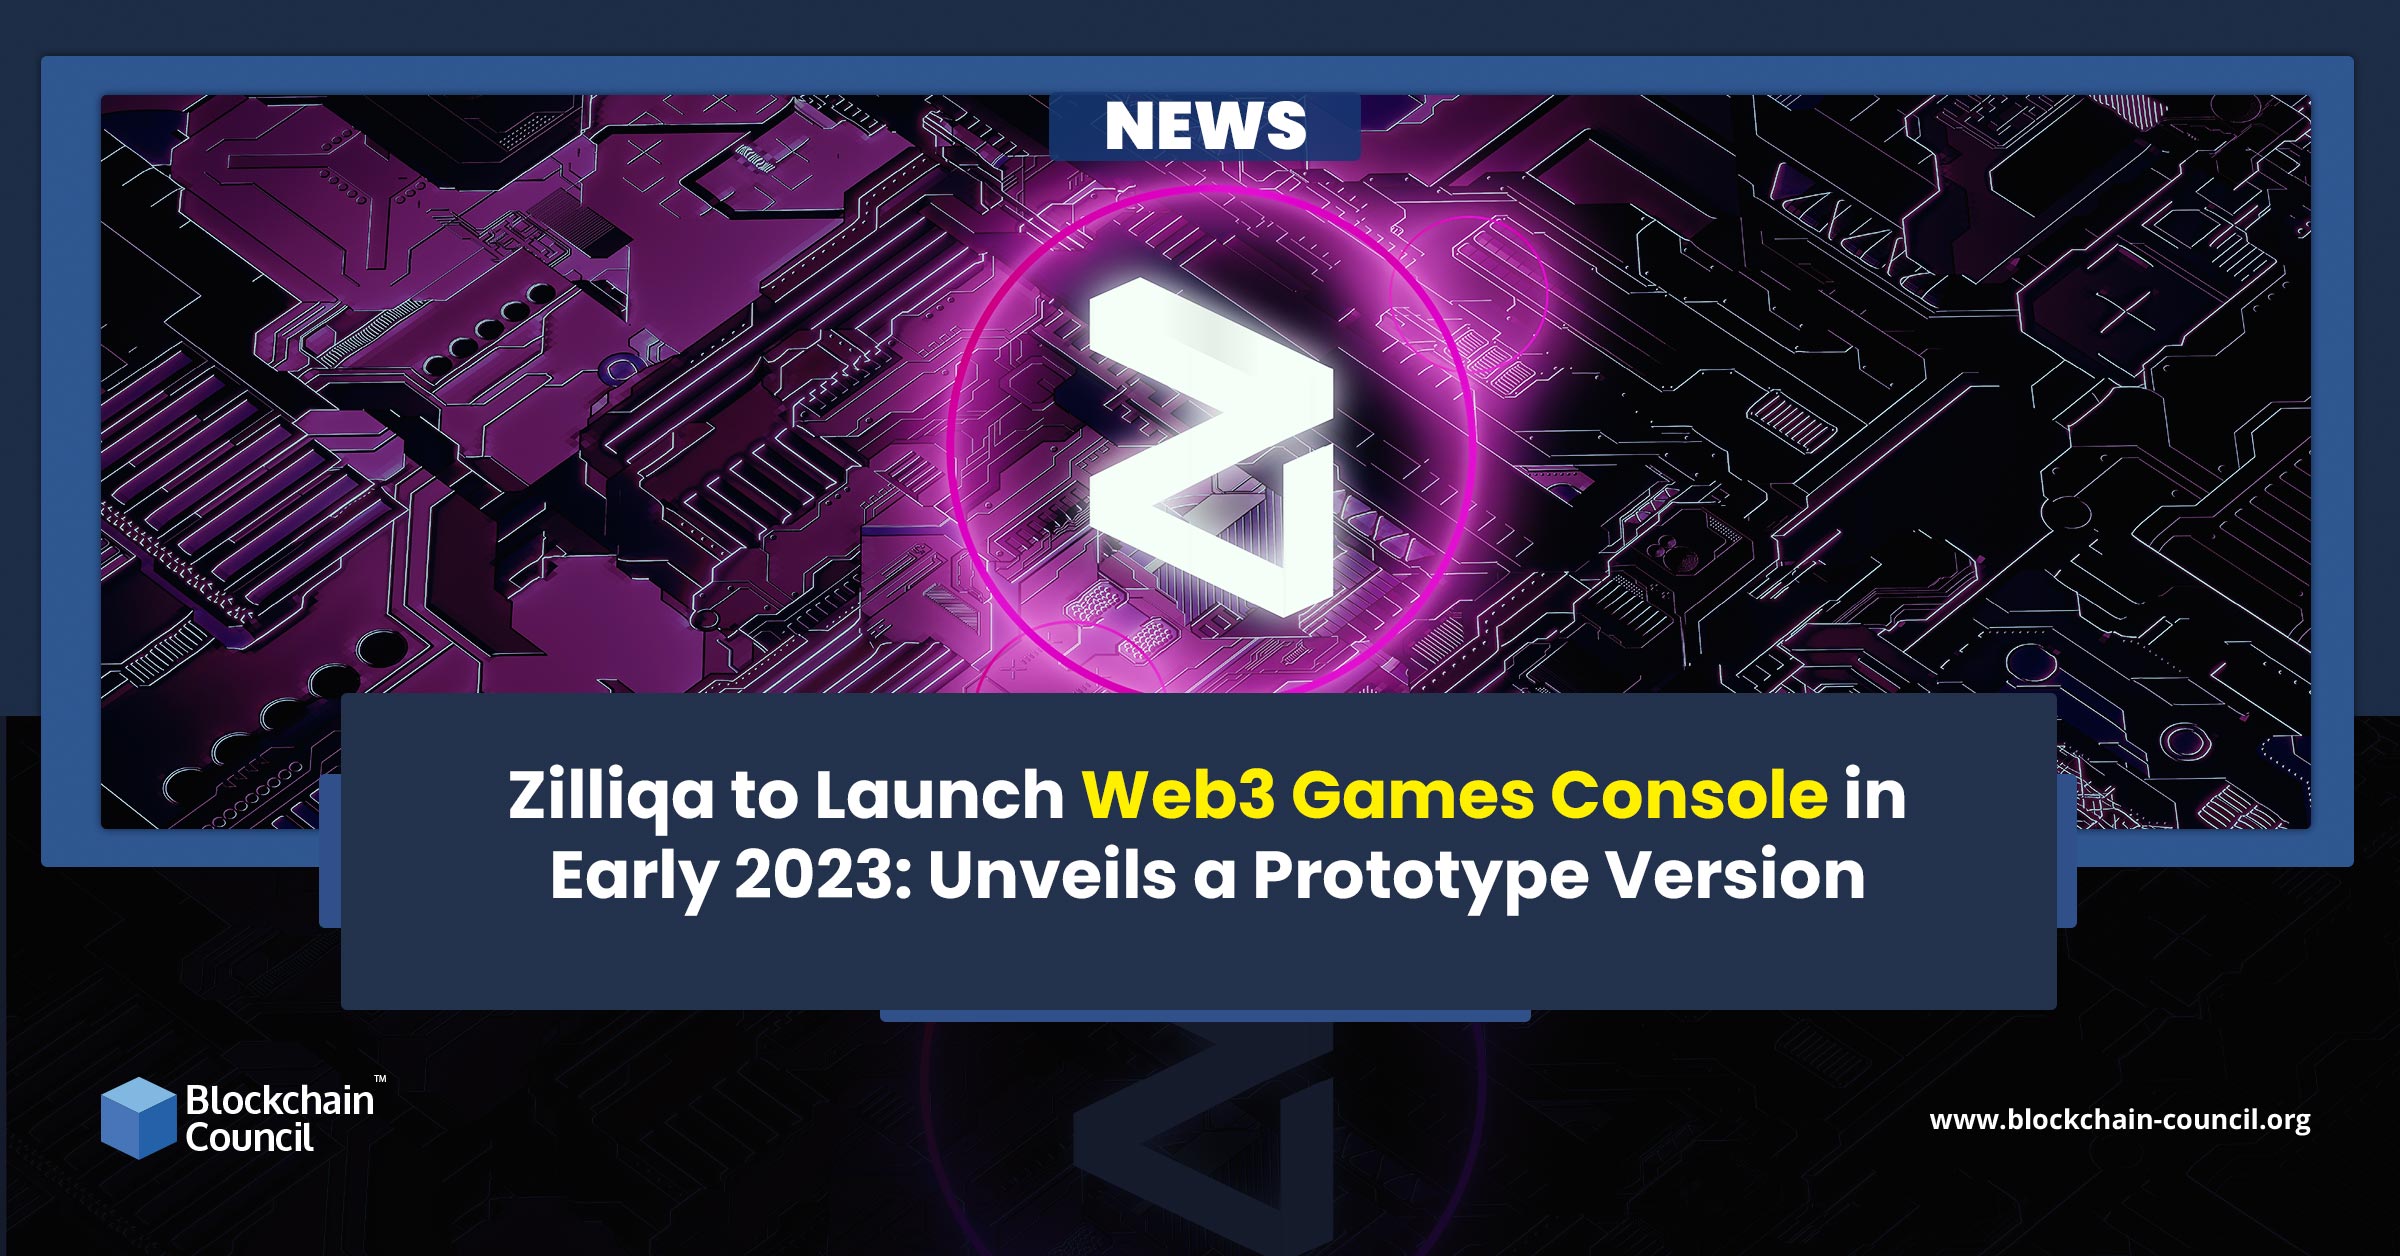 Zilliqa to Launch Web3 Games Console in Early 2023 Unveils a Prototype Version